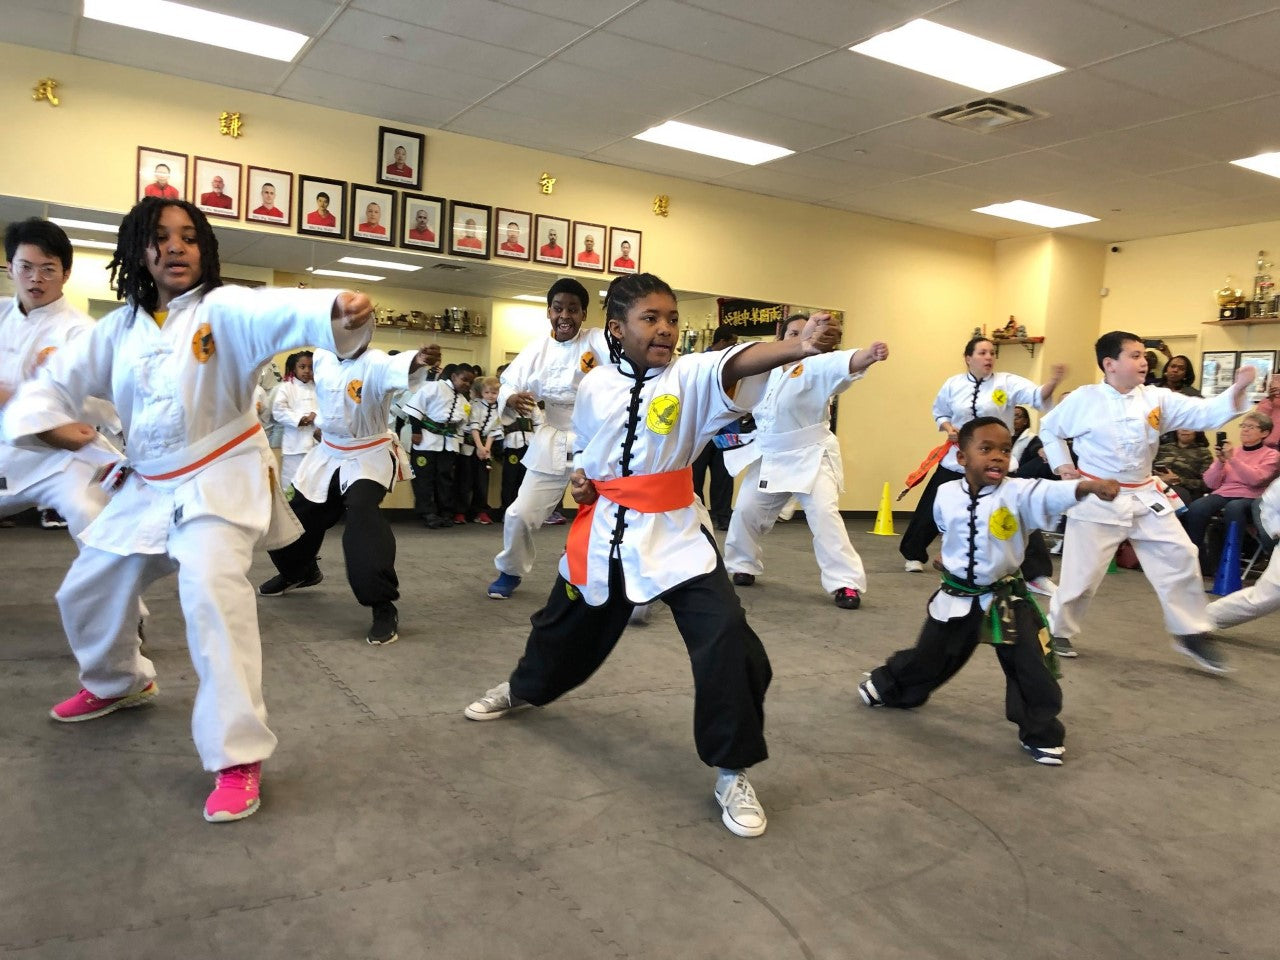 HOW CAN A CHILD BUILD CHARACTER WITH MARTIAL ARTS?